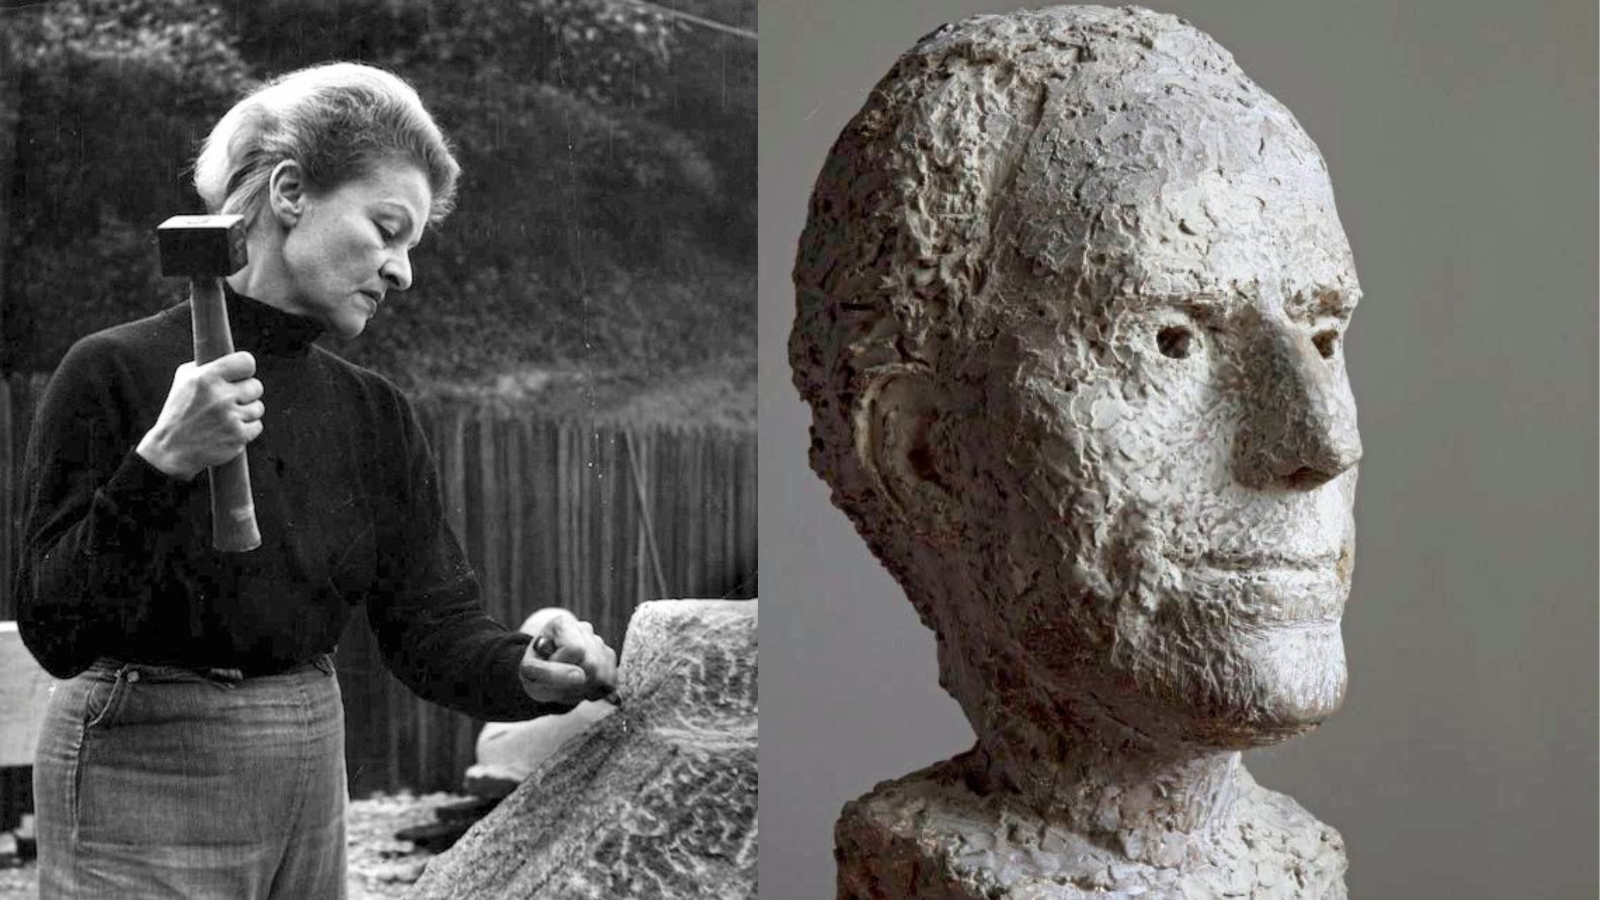 Sculptor Anna Mahler with the bust she created of her father, the composer Gustav Mahler (Bild: Mahlerfoundation)